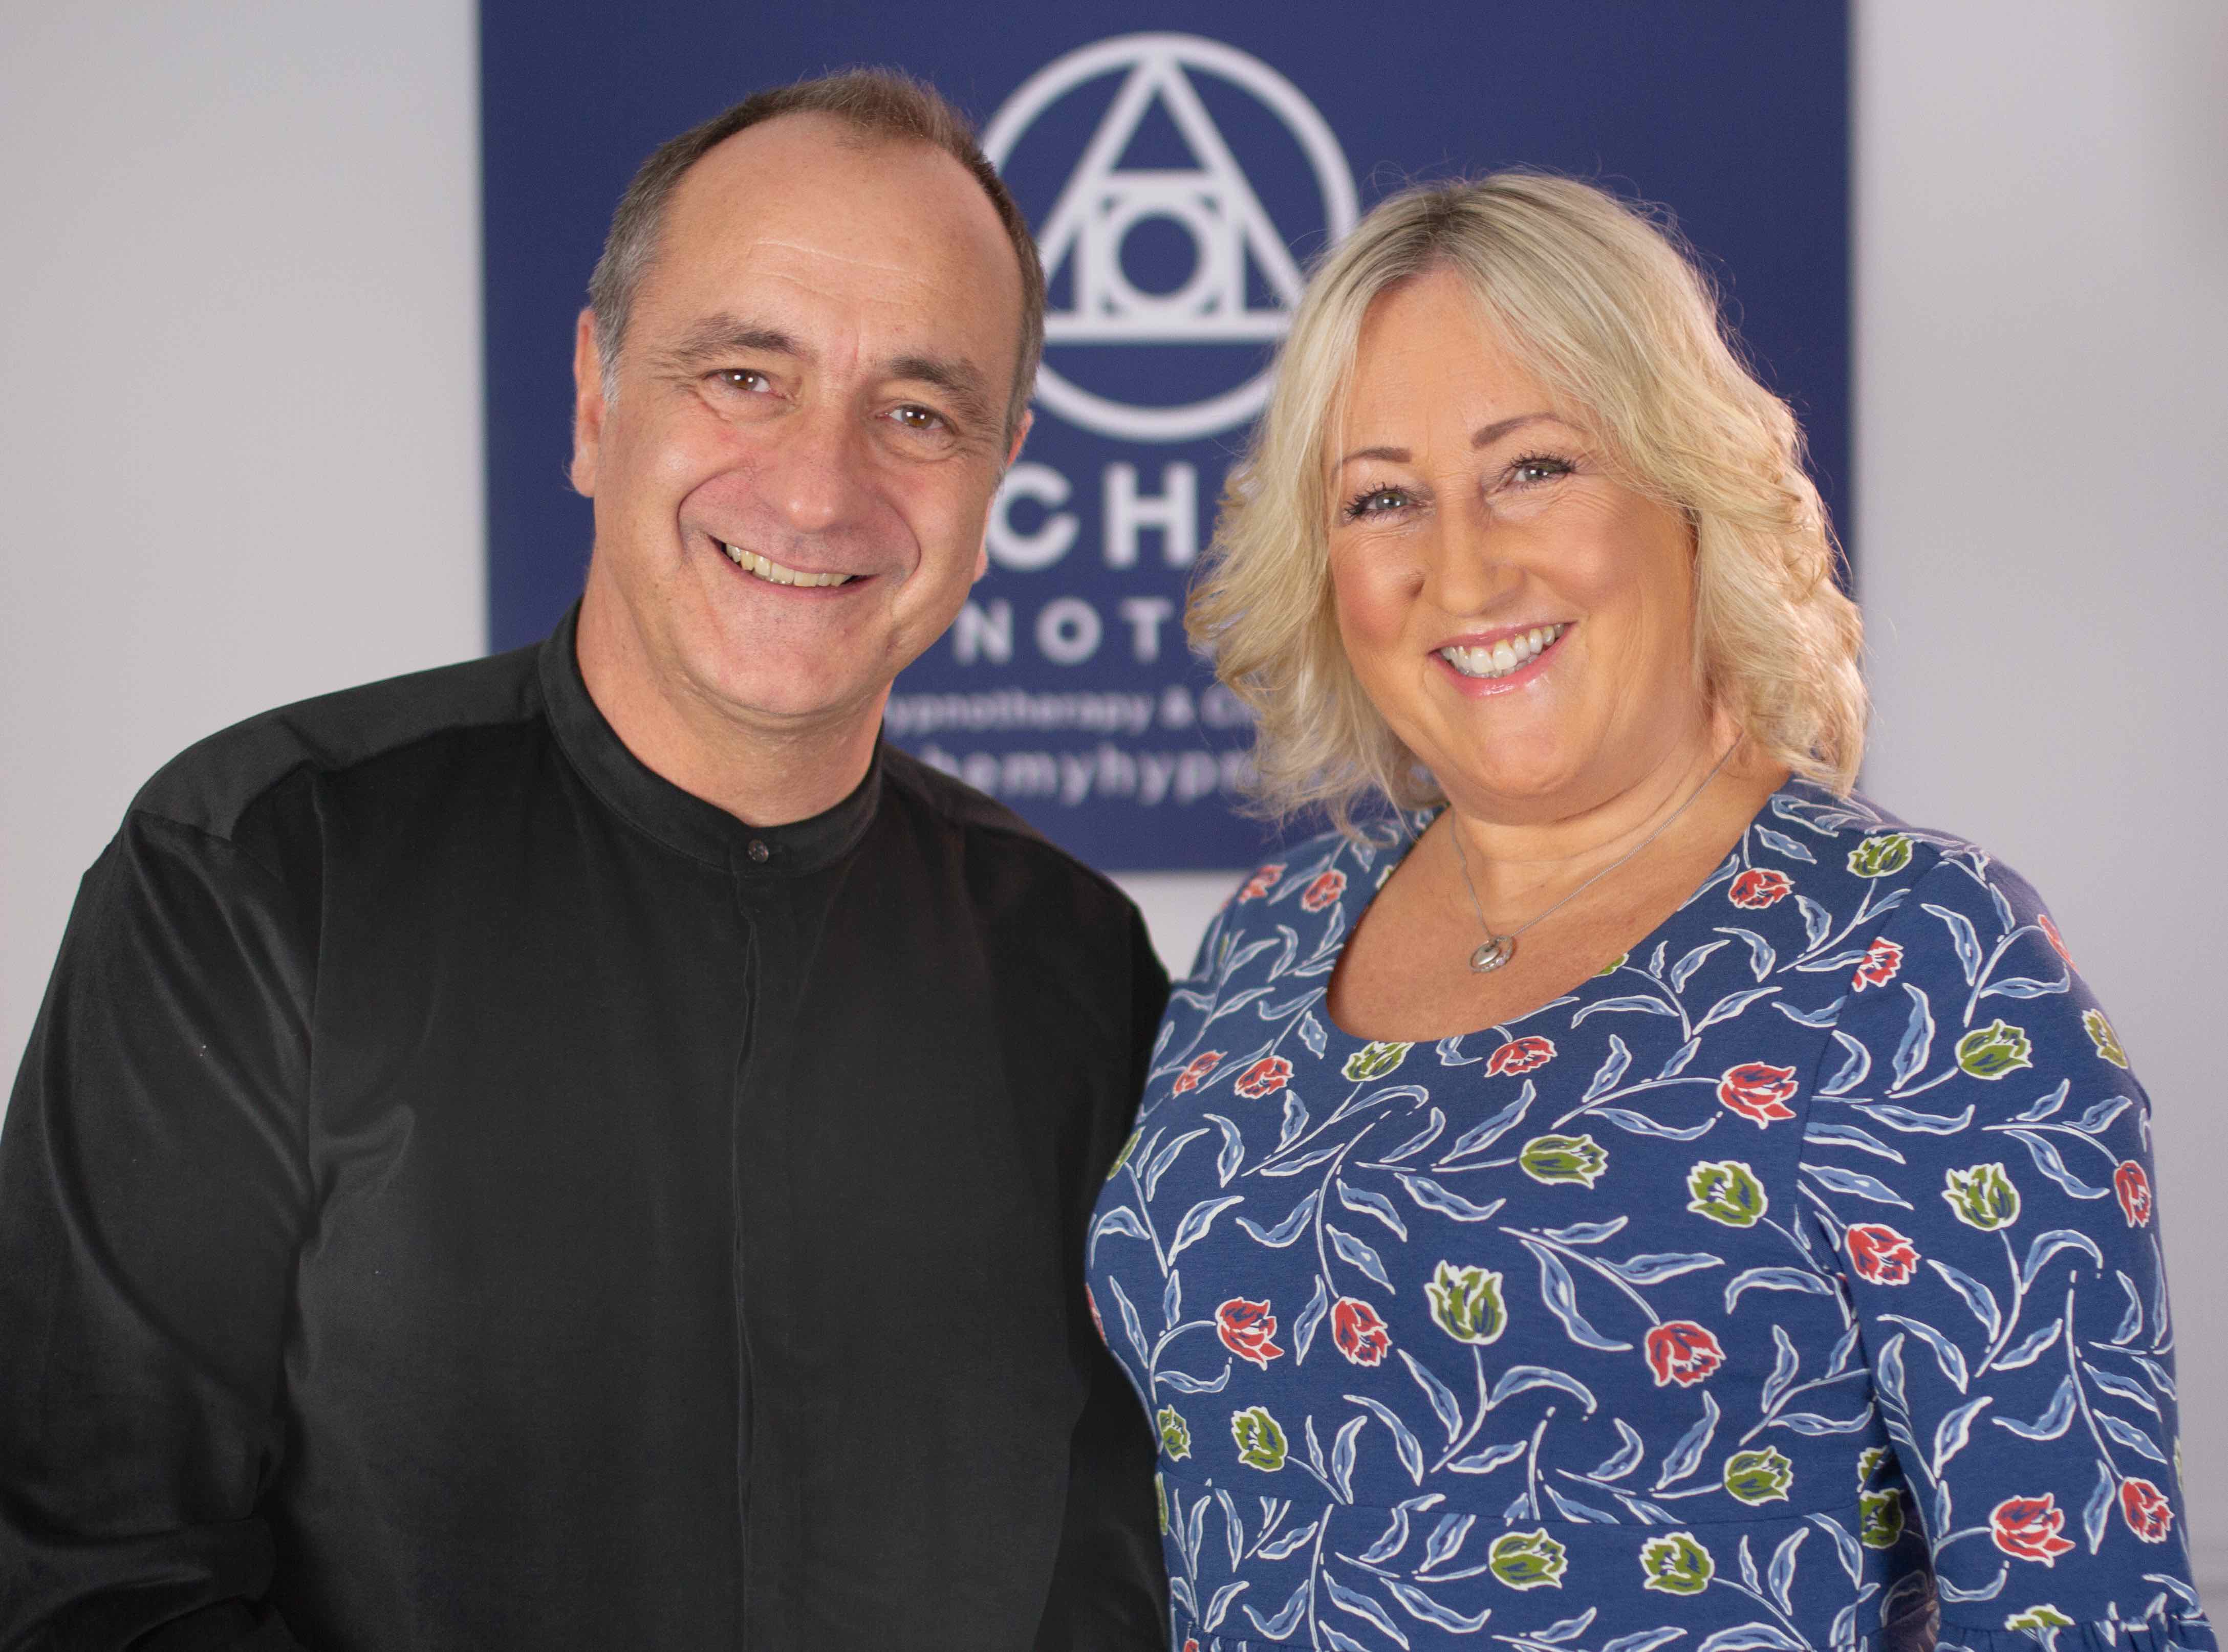 This photo shows Gareth and Enfys, The Alchemists at Alchemy Hypnotherapy